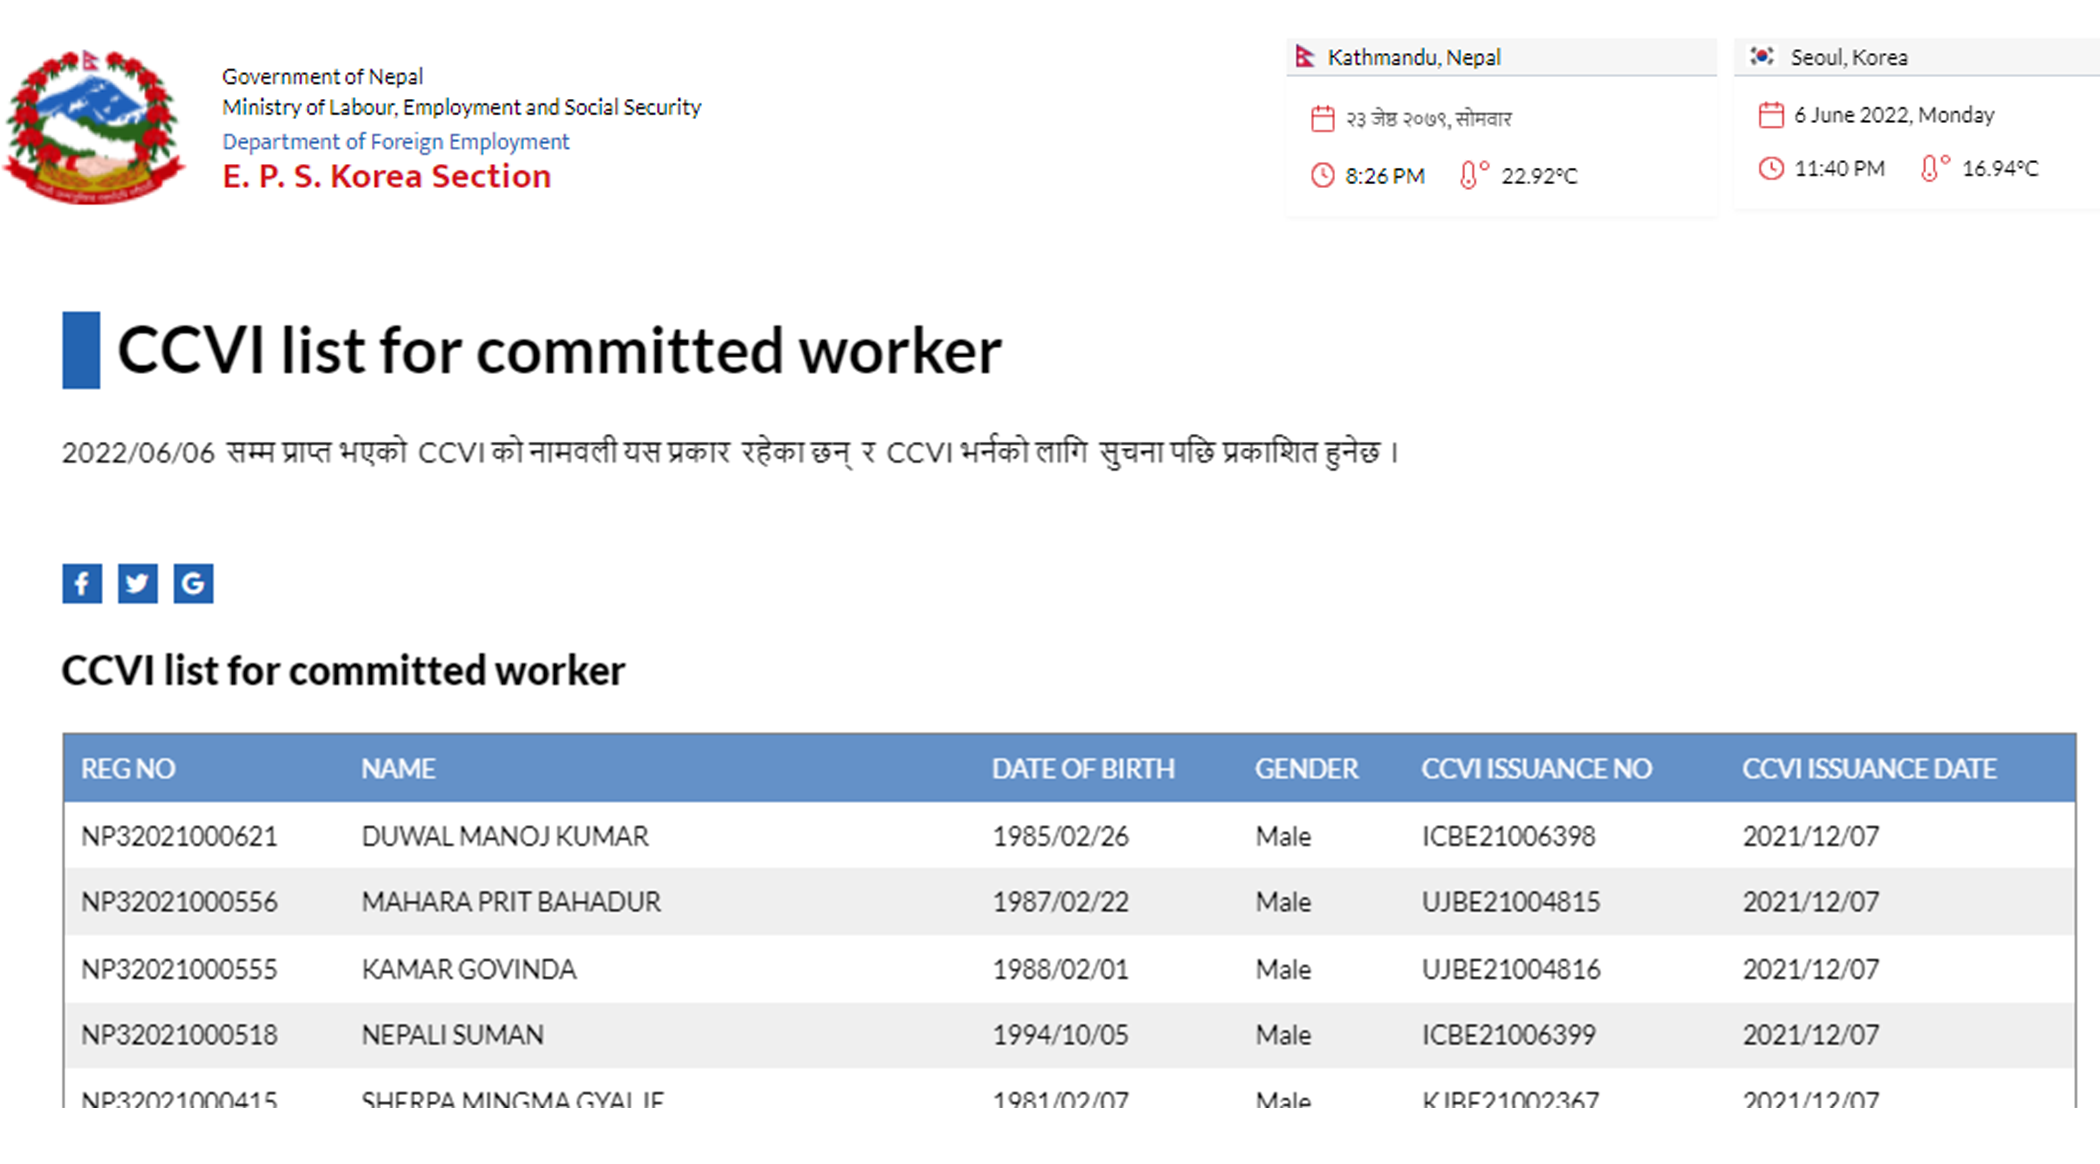 CCVI list of committed worker -2022/06/06